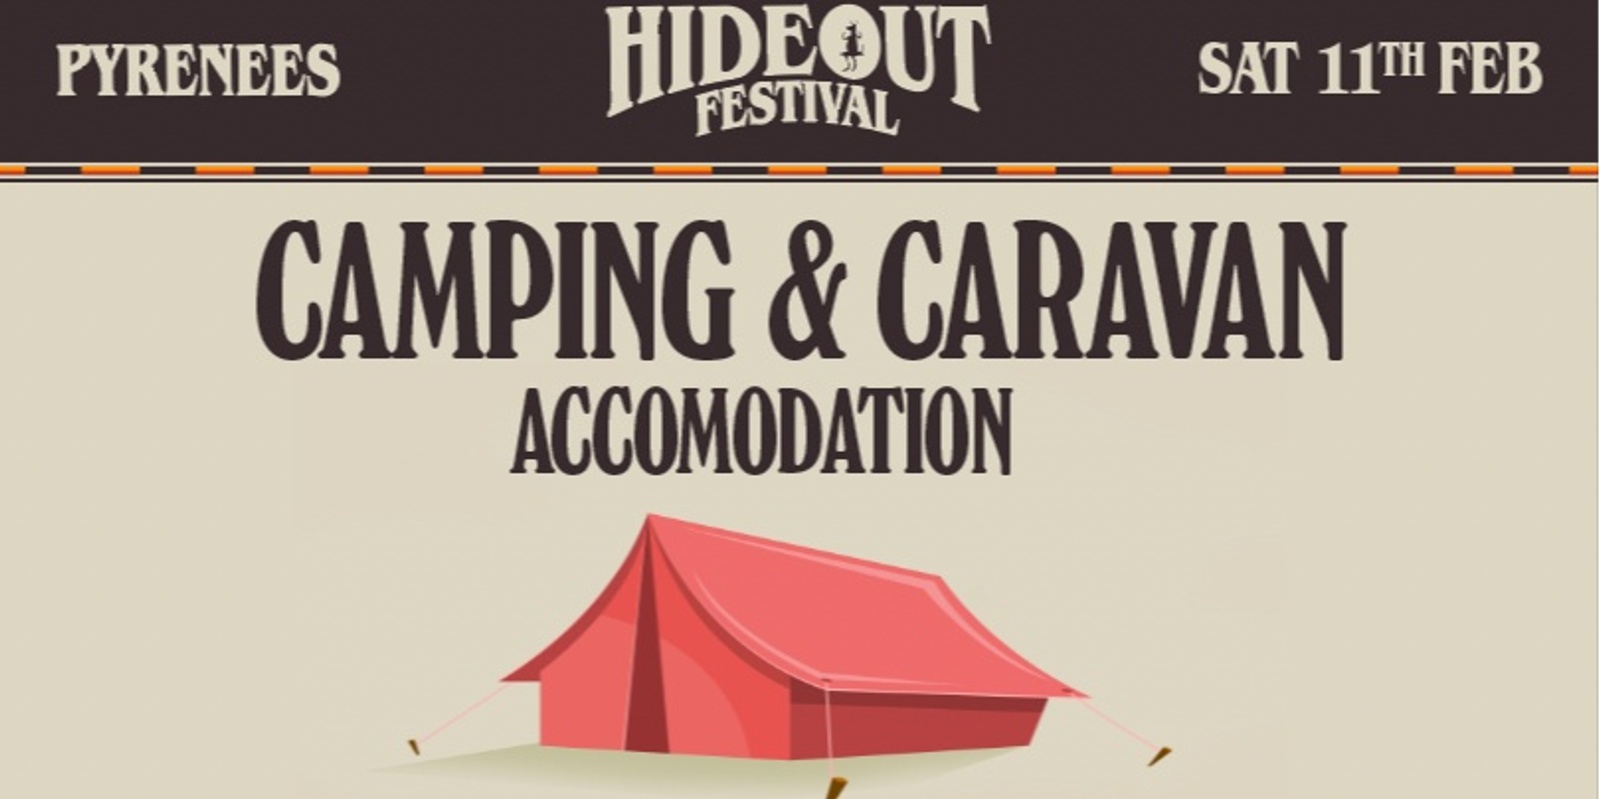 Banner image for Pyrenees Hideout Festival - Overnight Camping